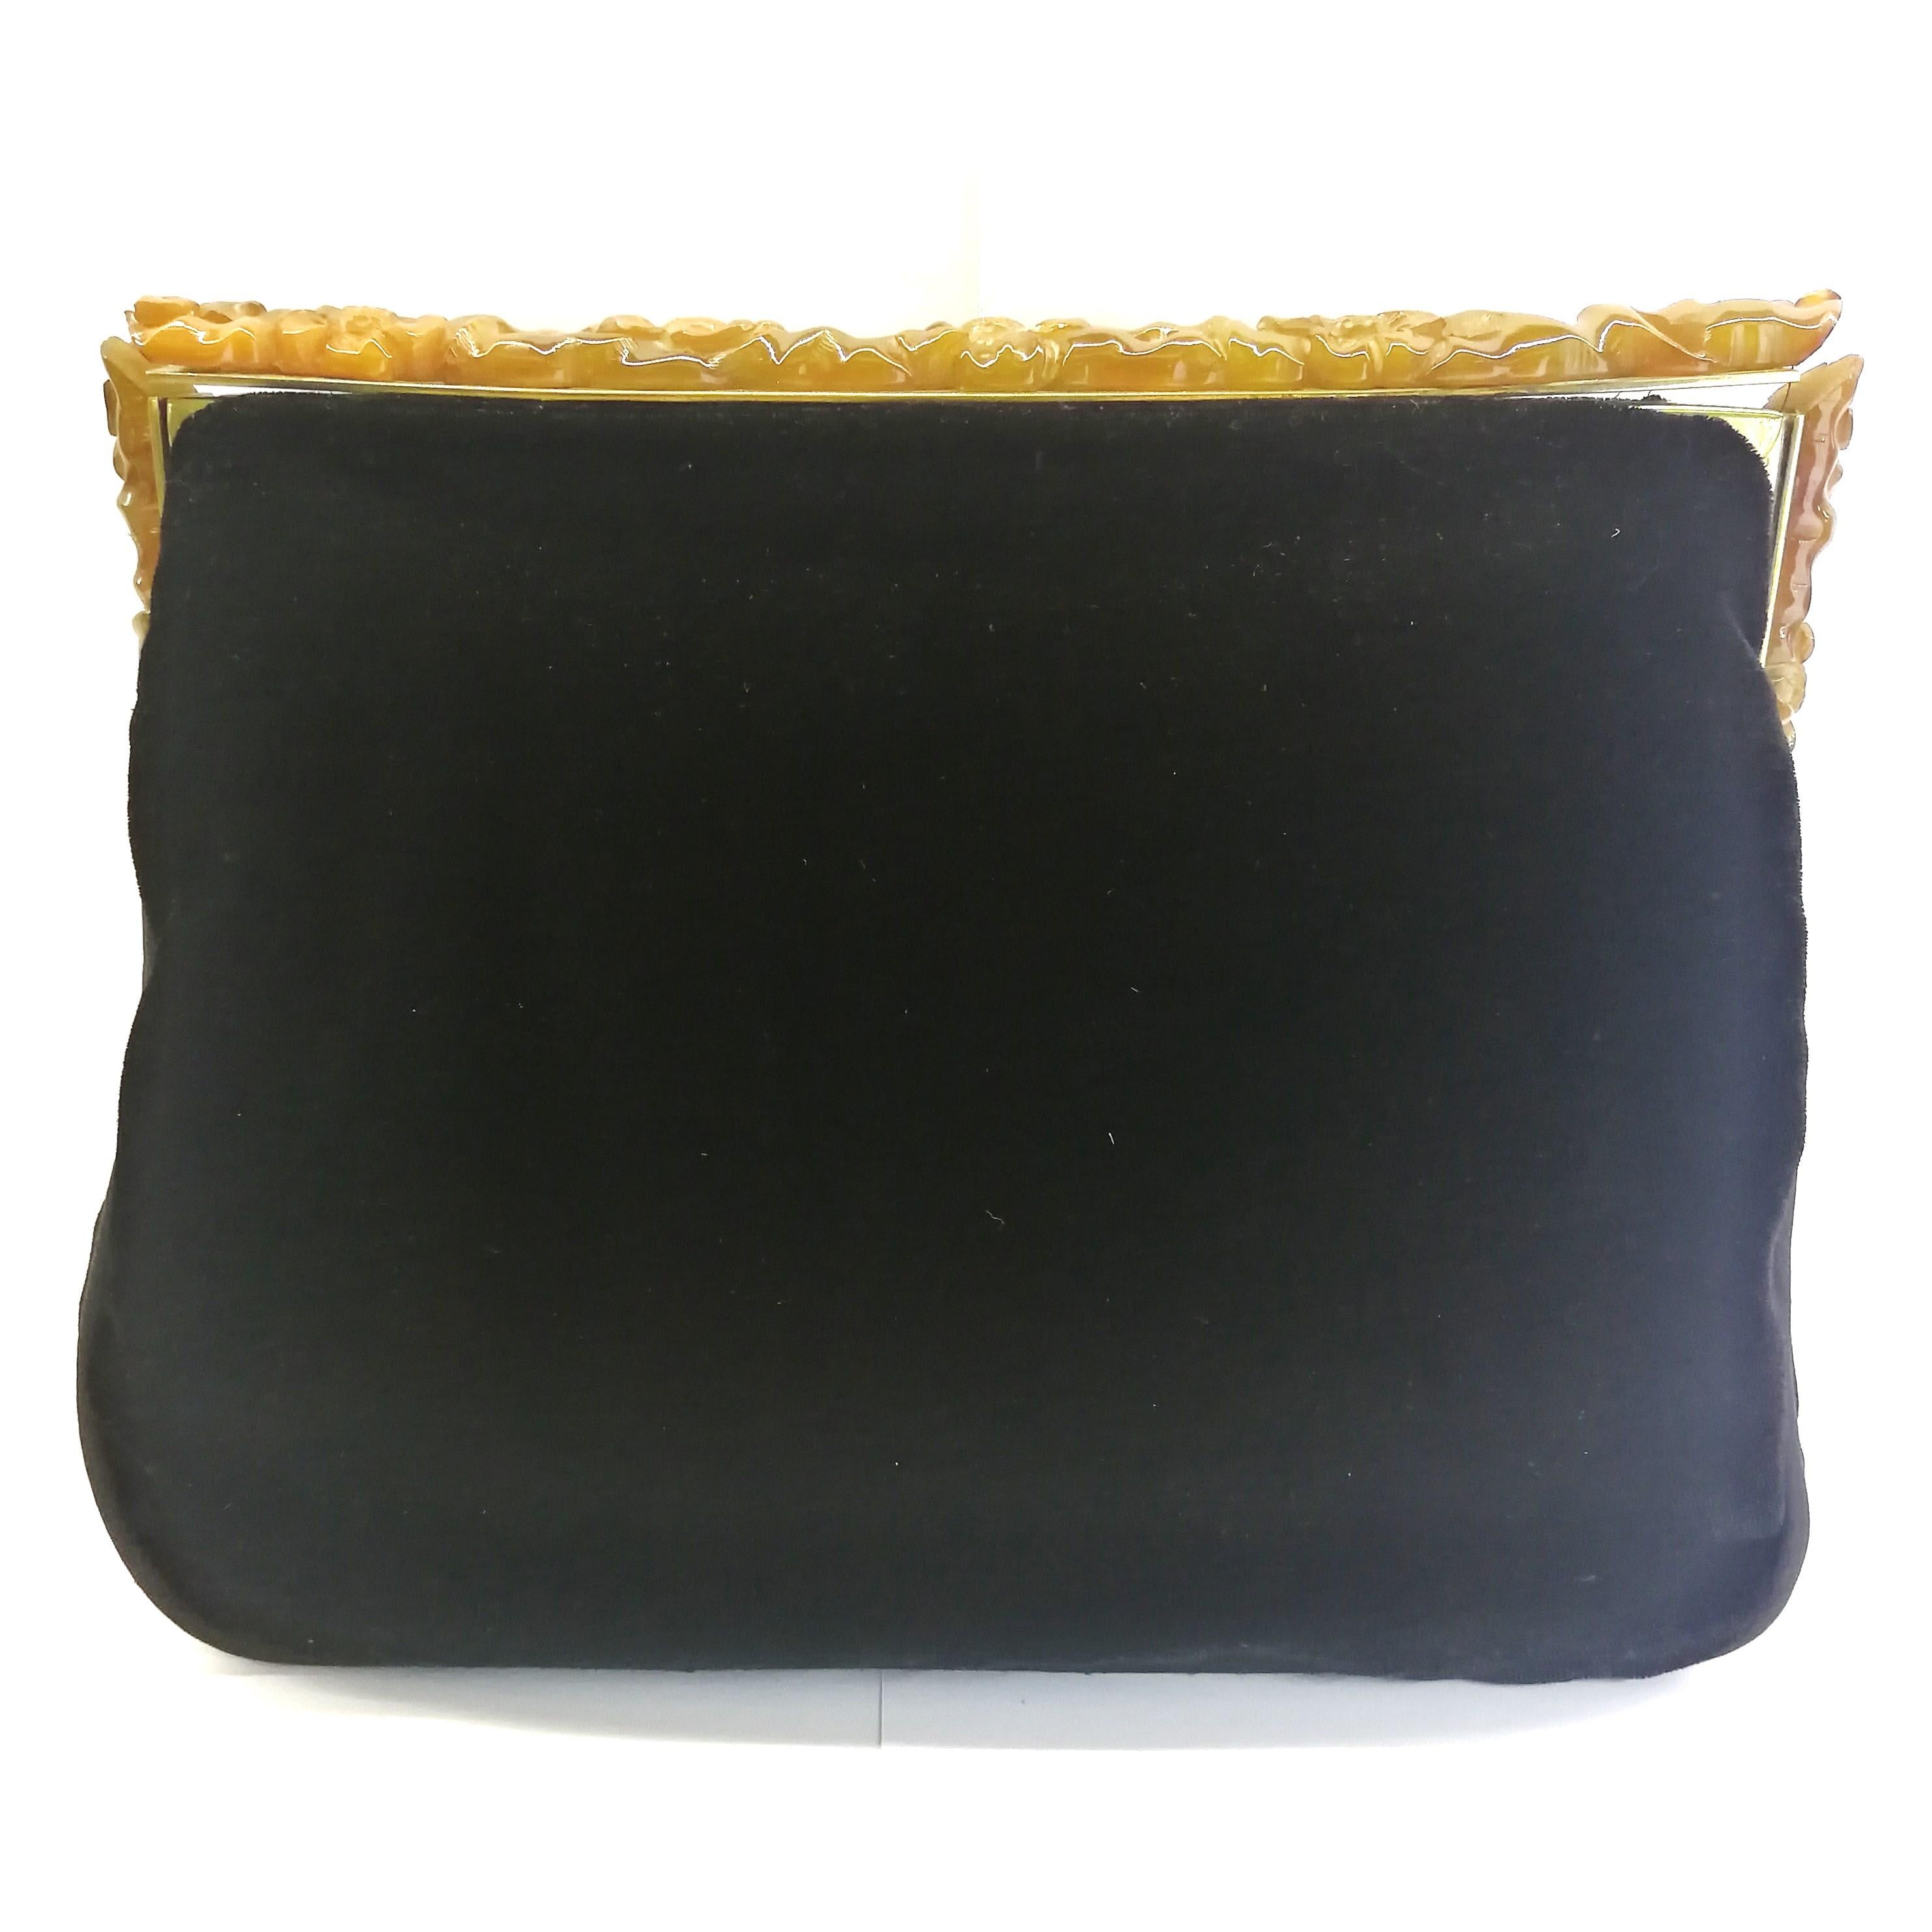 An intricately carved Bakelite frame from the 1930s, with stylised flower and branch motifs, is attached to a black silk velvet clutch , which is piped in black silk, to create this very smart and period clutch. Possibly German in origin, judging by